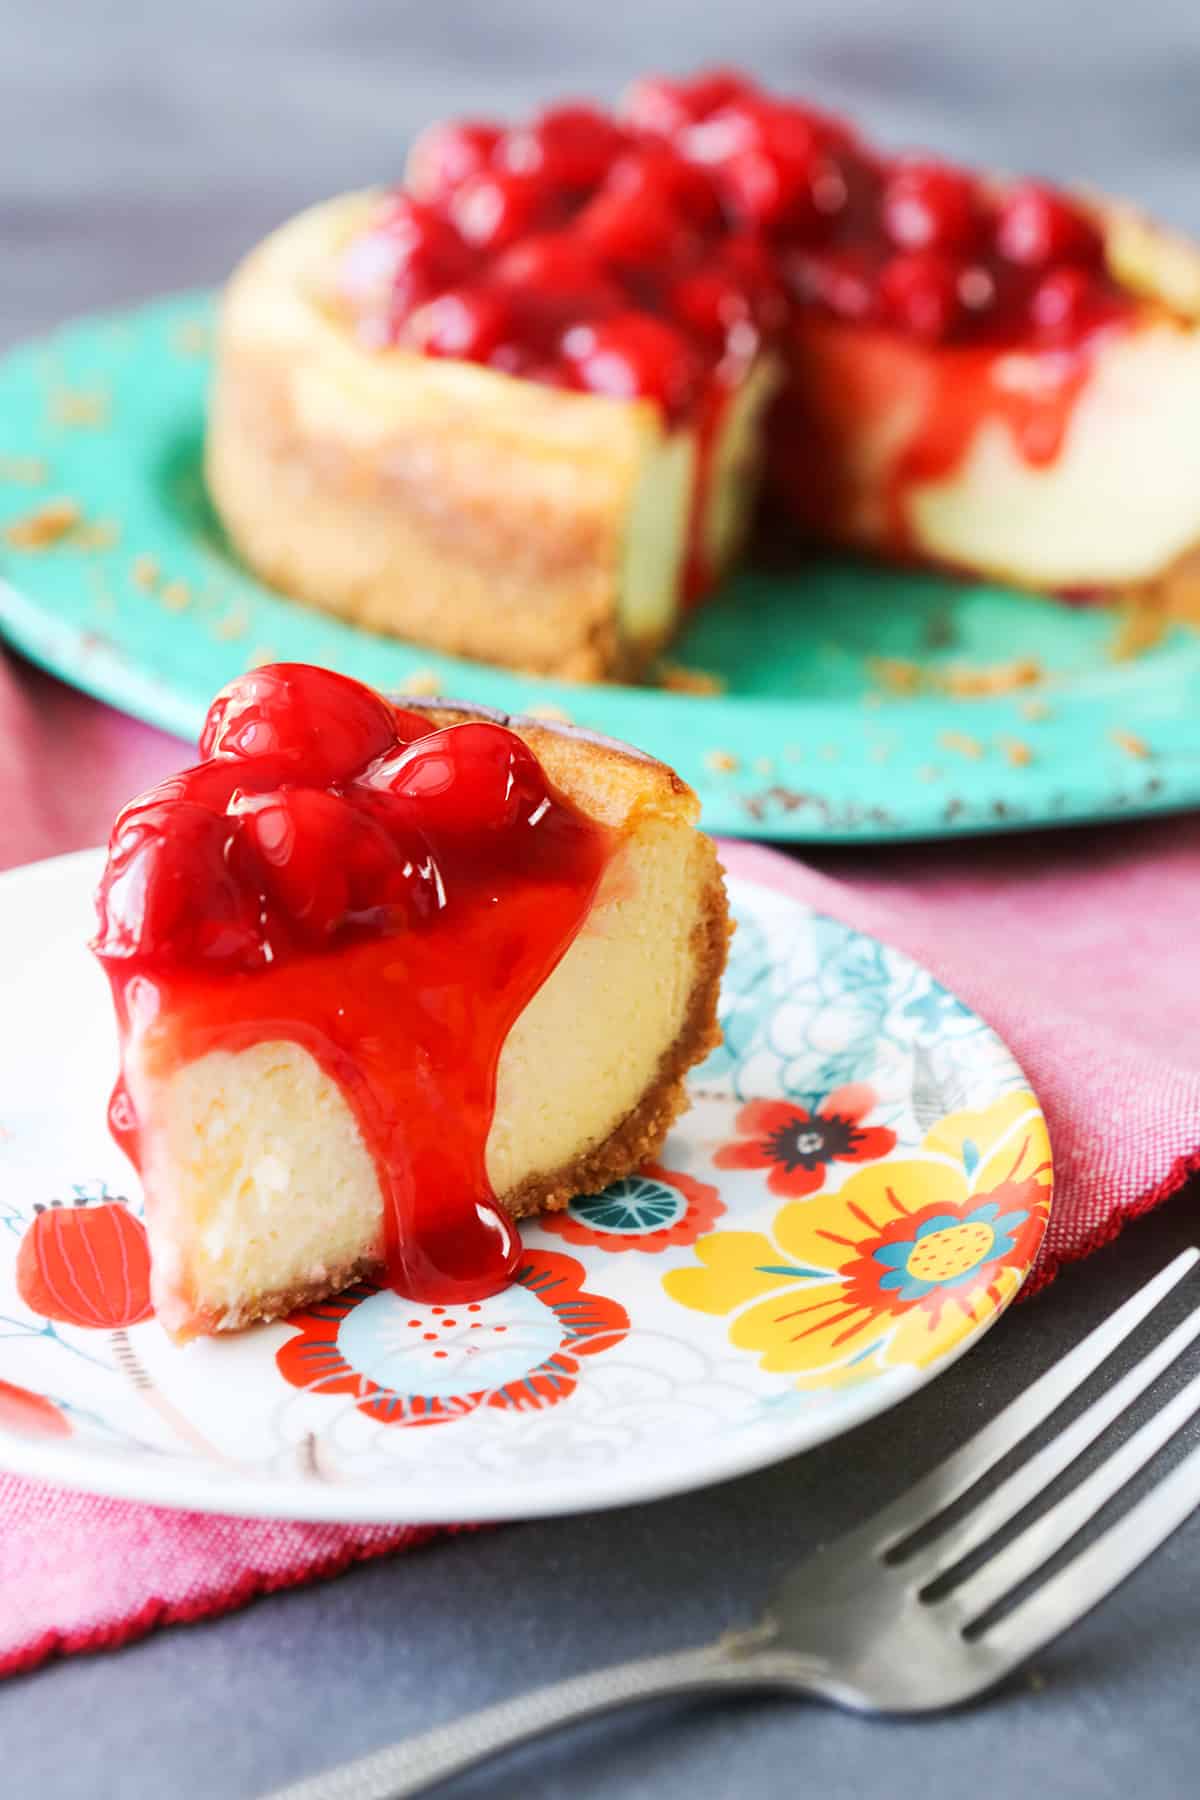  Slice of cherry cheesecake on a plate.